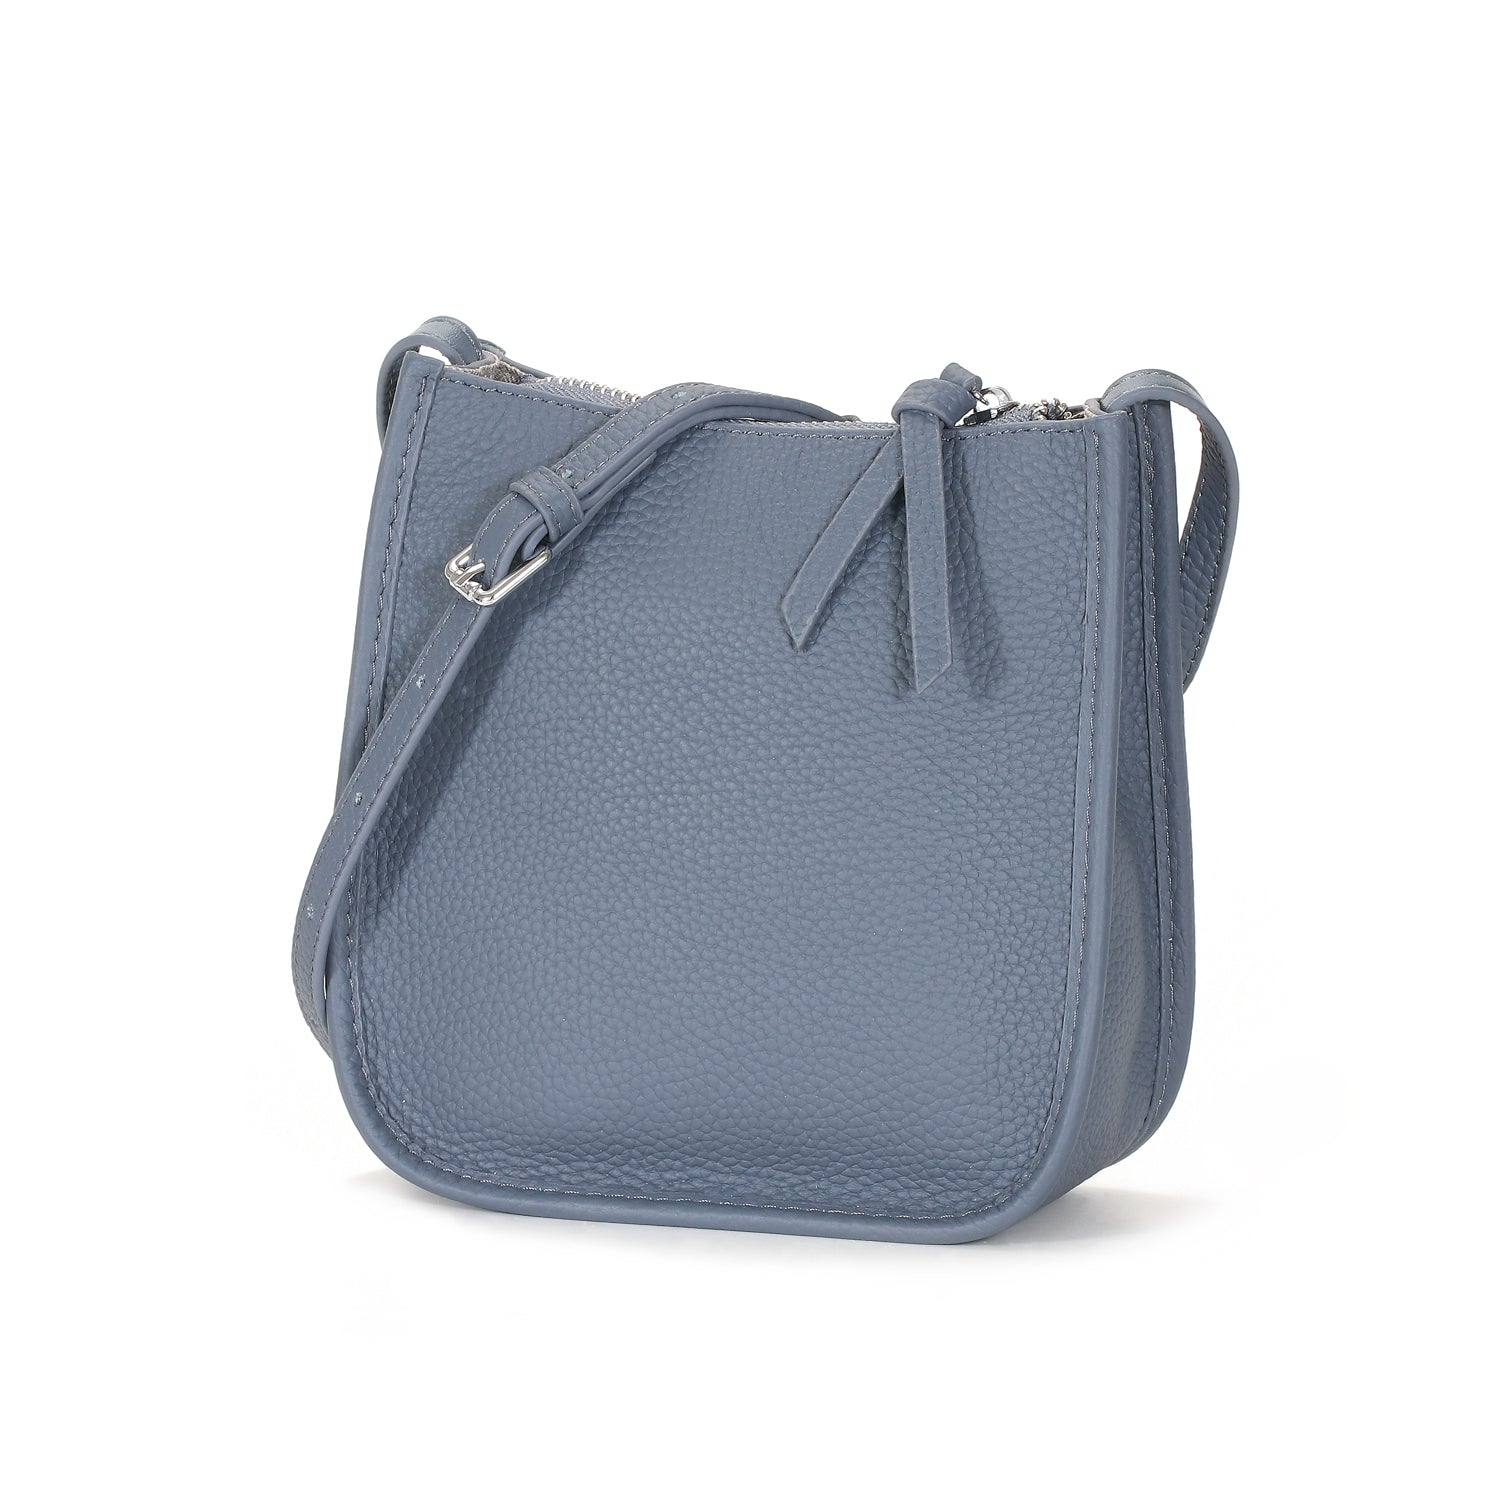 Is the large Calvi pouch functional?